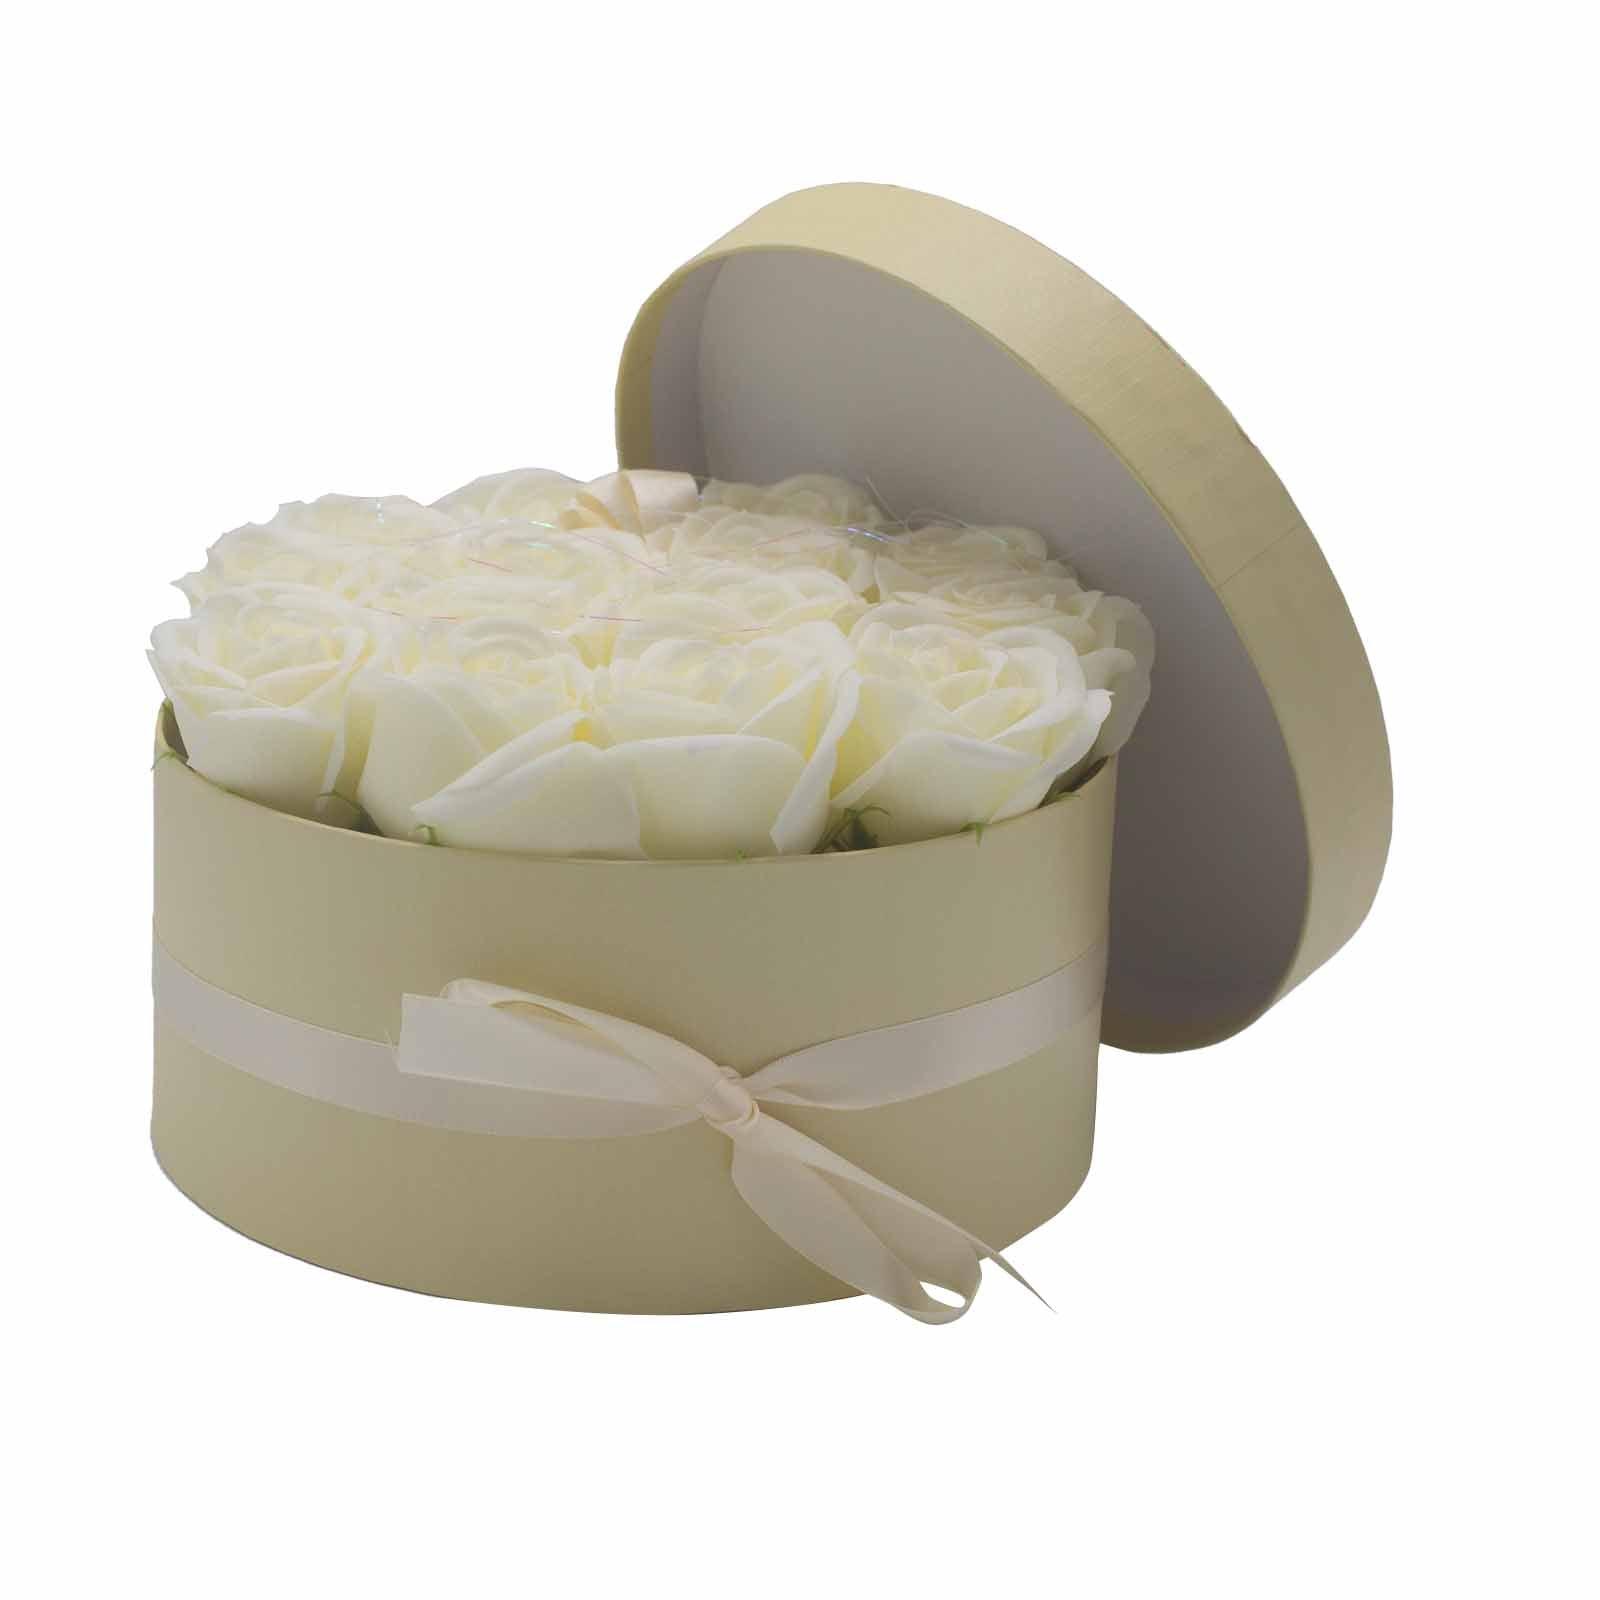 Soap Flower Gift Bouquet - 14 Cream Roses - Round